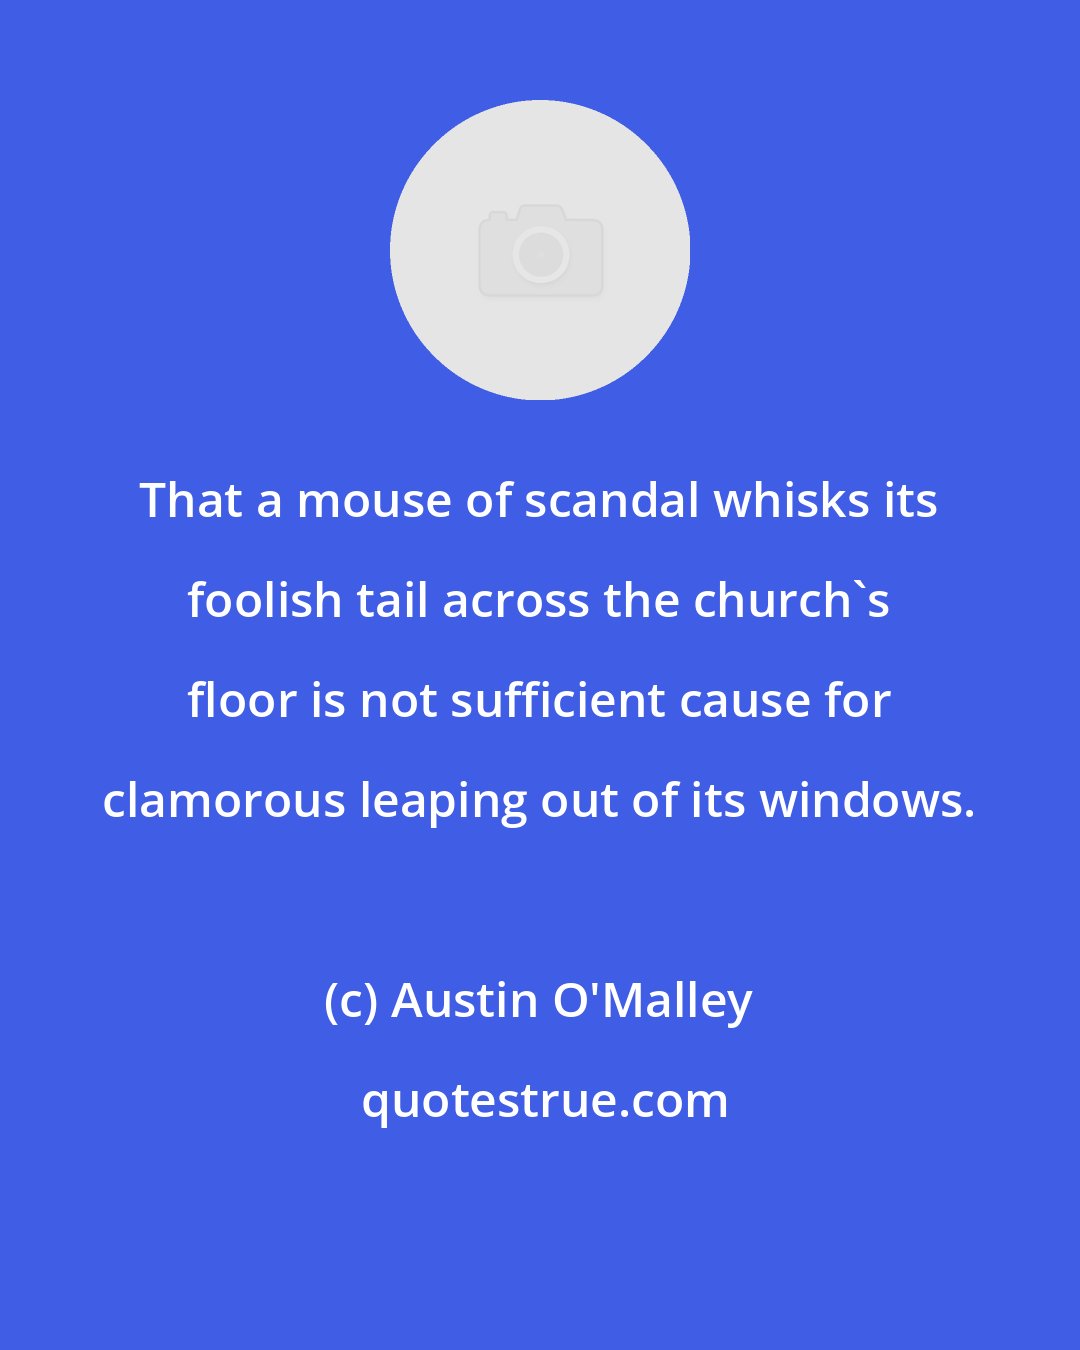 Austin O'Malley: That a mouse of scandal whisks its foolish tail across the church's floor is not sufficient cause for clamorous leaping out of its windows.